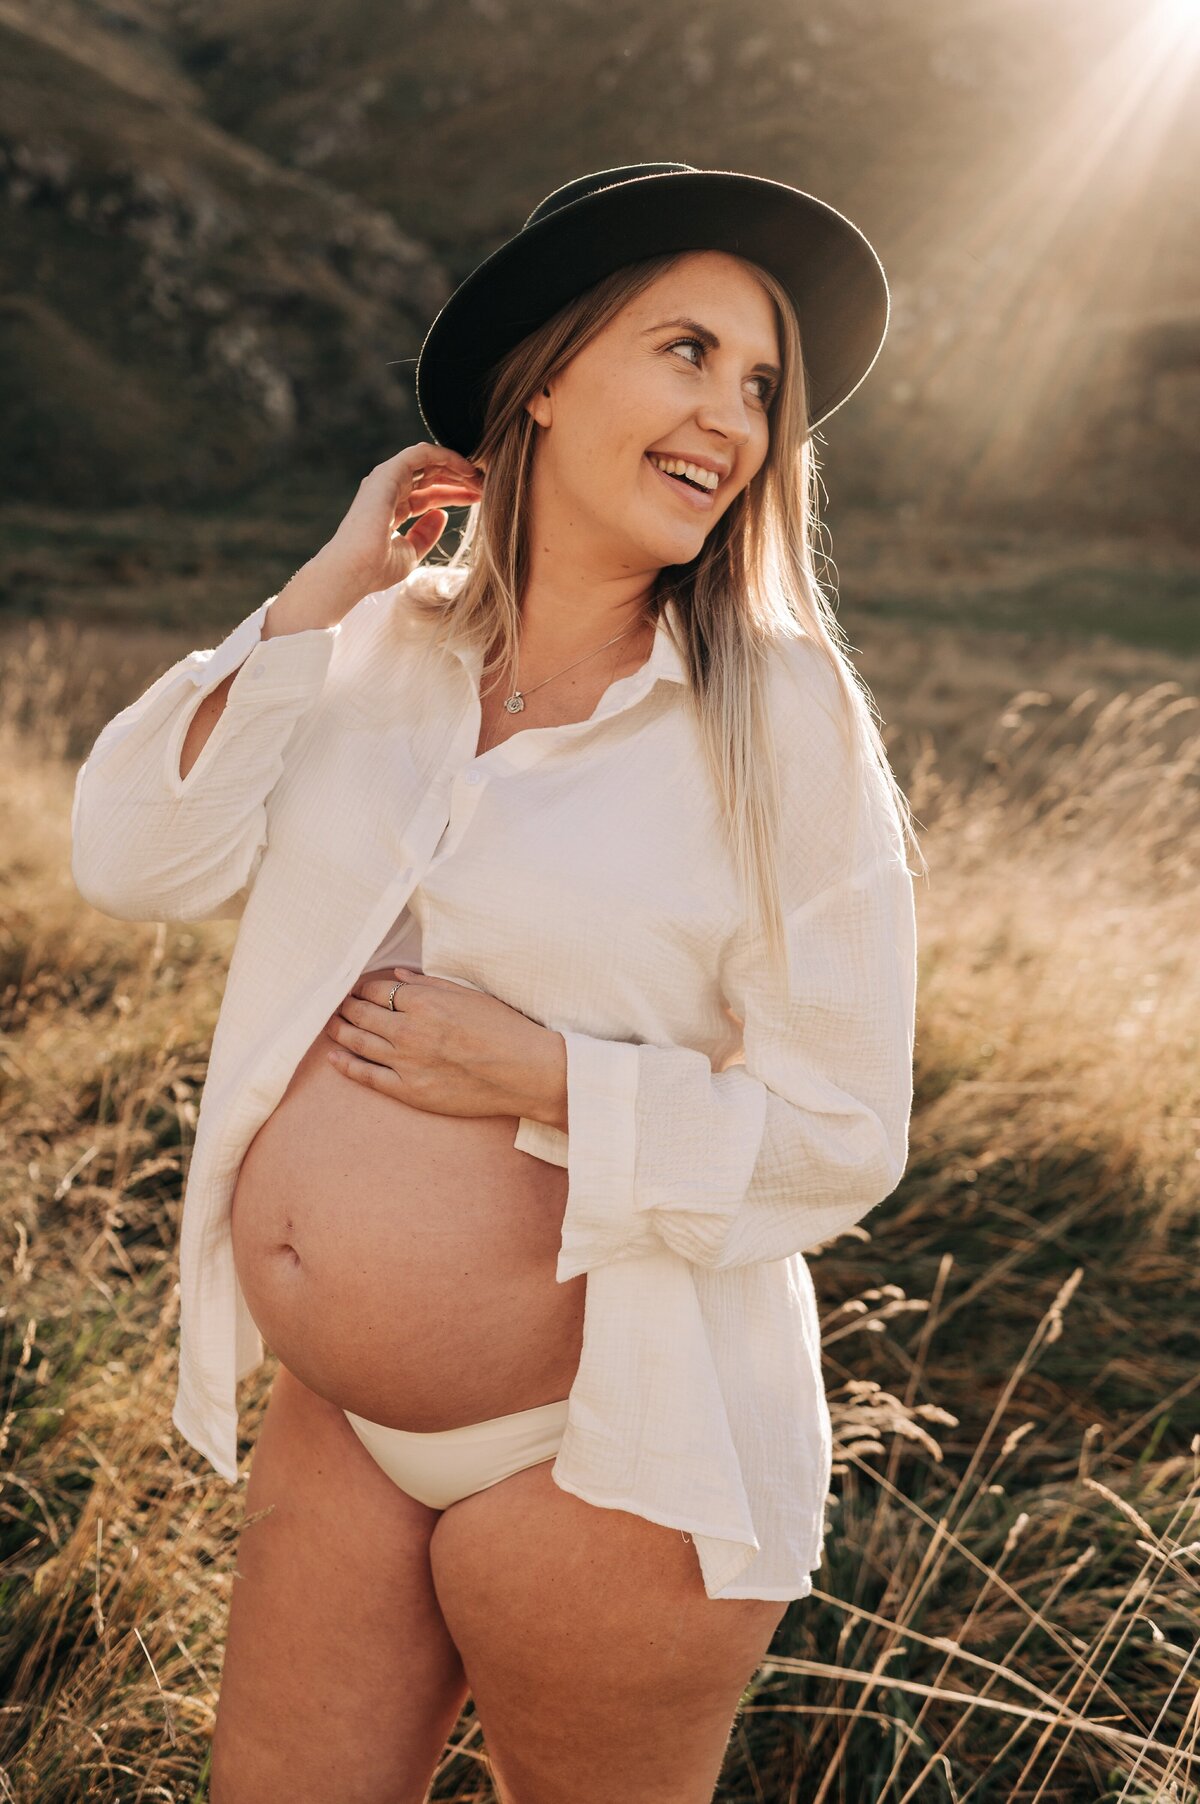 maternity taylors mistake christchurch photographer white lace dress at beach in water winter best candid long dry grass white shirt green hat